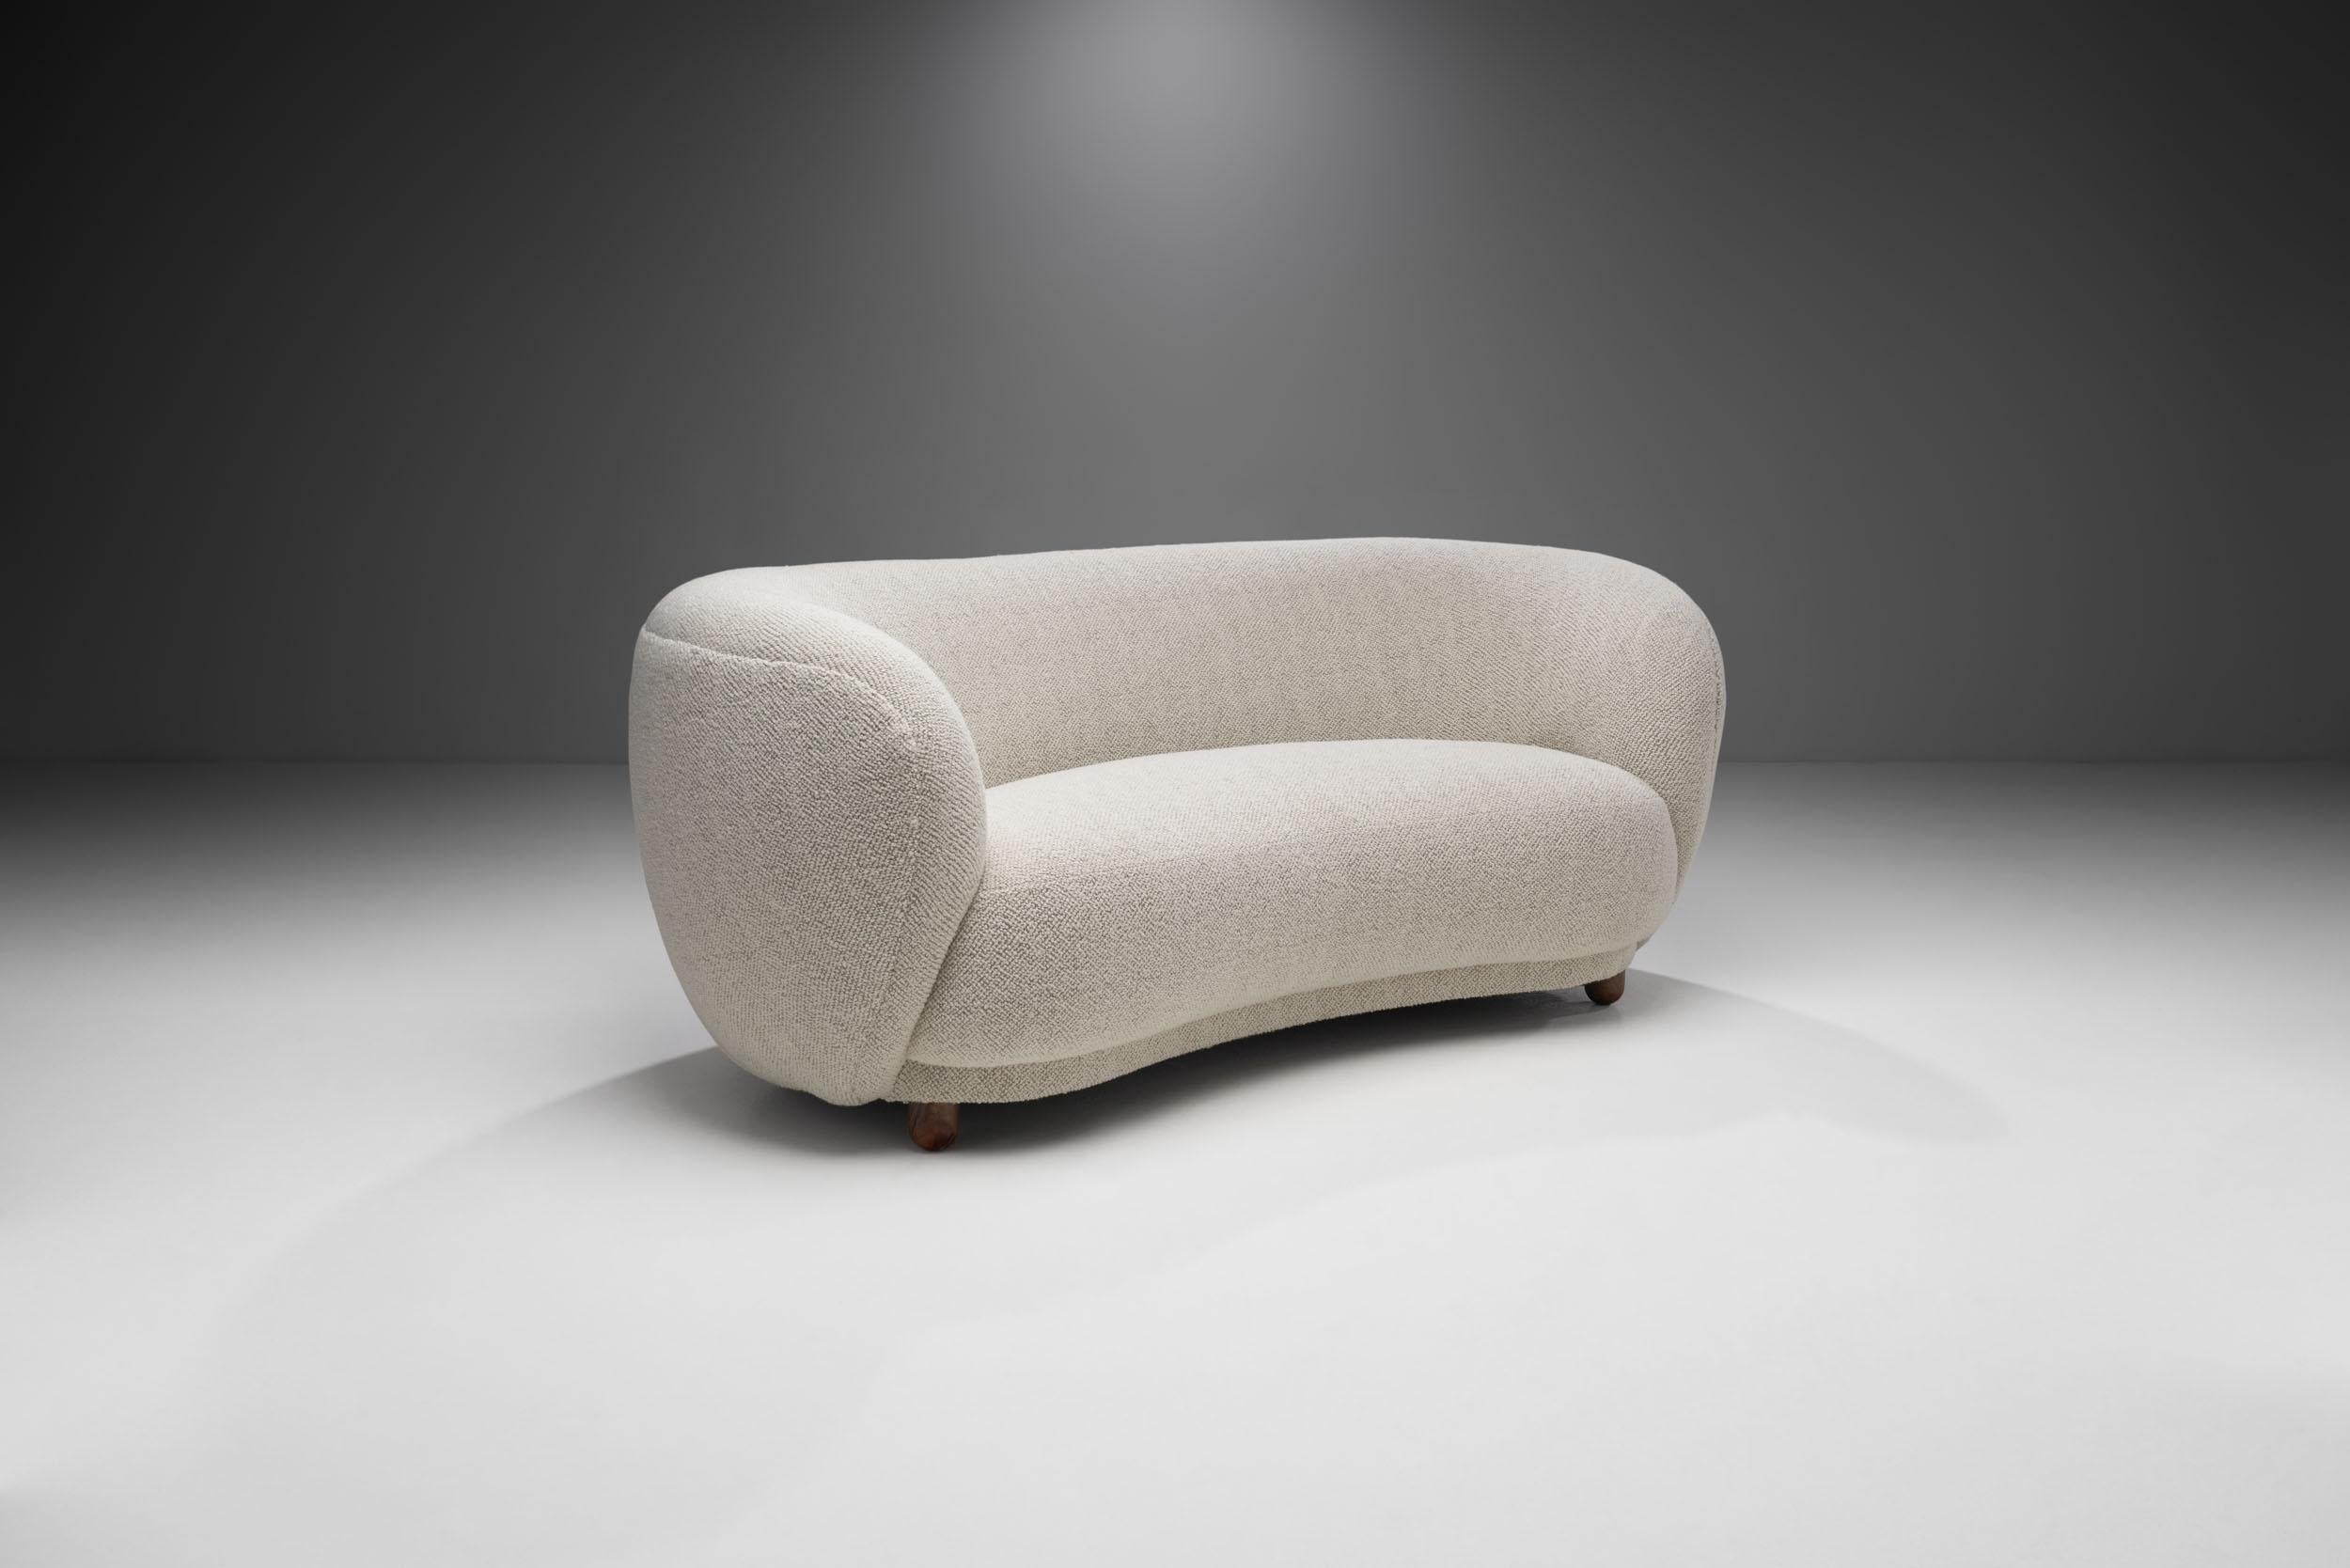 This beautiful Danish two-seater sofa recalls the Art Deco style of the 1930s with the recognizable touch of Danish Modernism. Thanks to its elegantly curved shape, this type of sofa is often referred to as the “banana” style. 

Apart from the